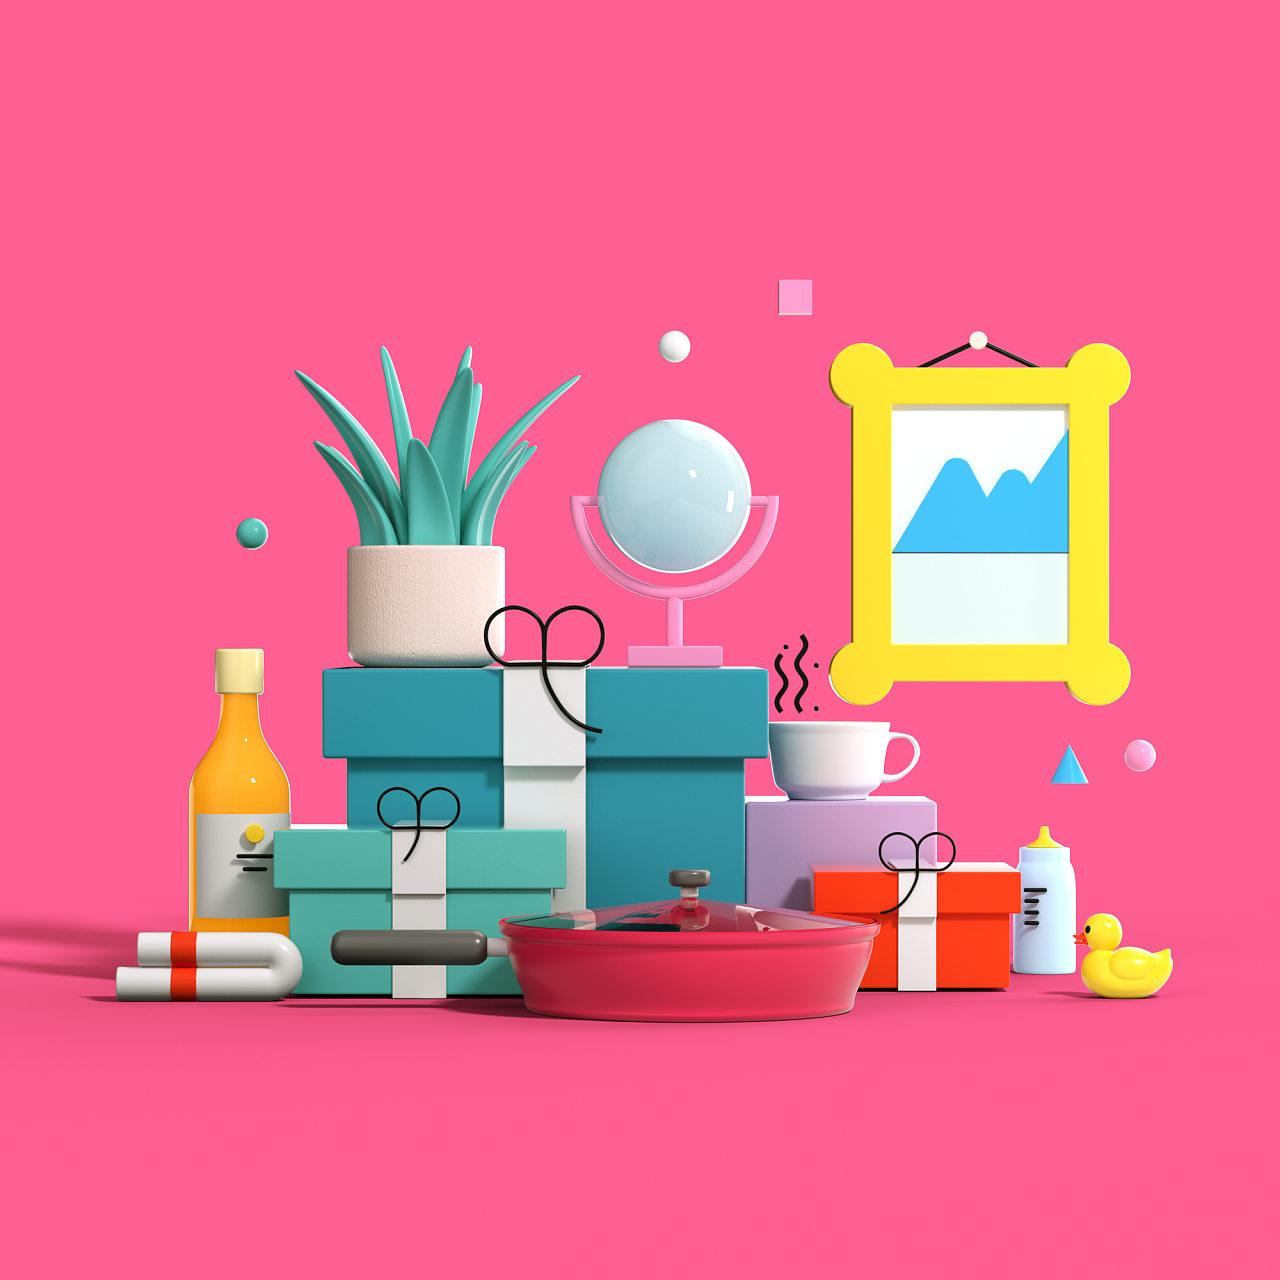 3D Illustrations collection